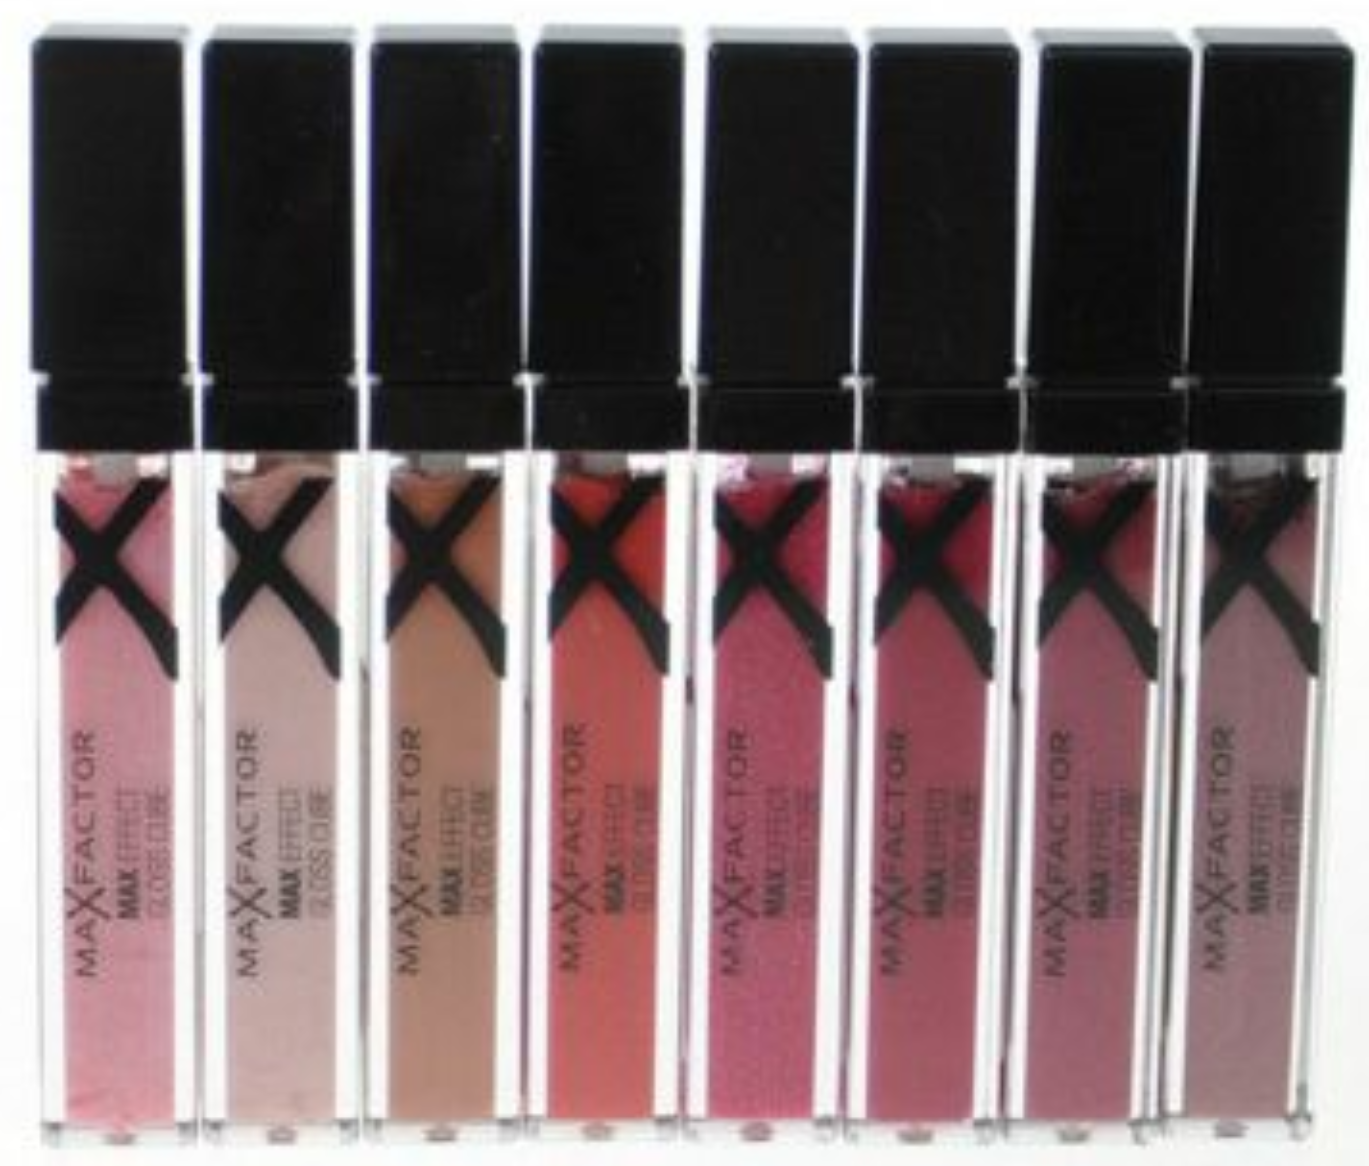 MAX FACTOR MAX EFFECT GLOSS CUBE - CHOOSE FROM 6 SHADES - UK SELLER*